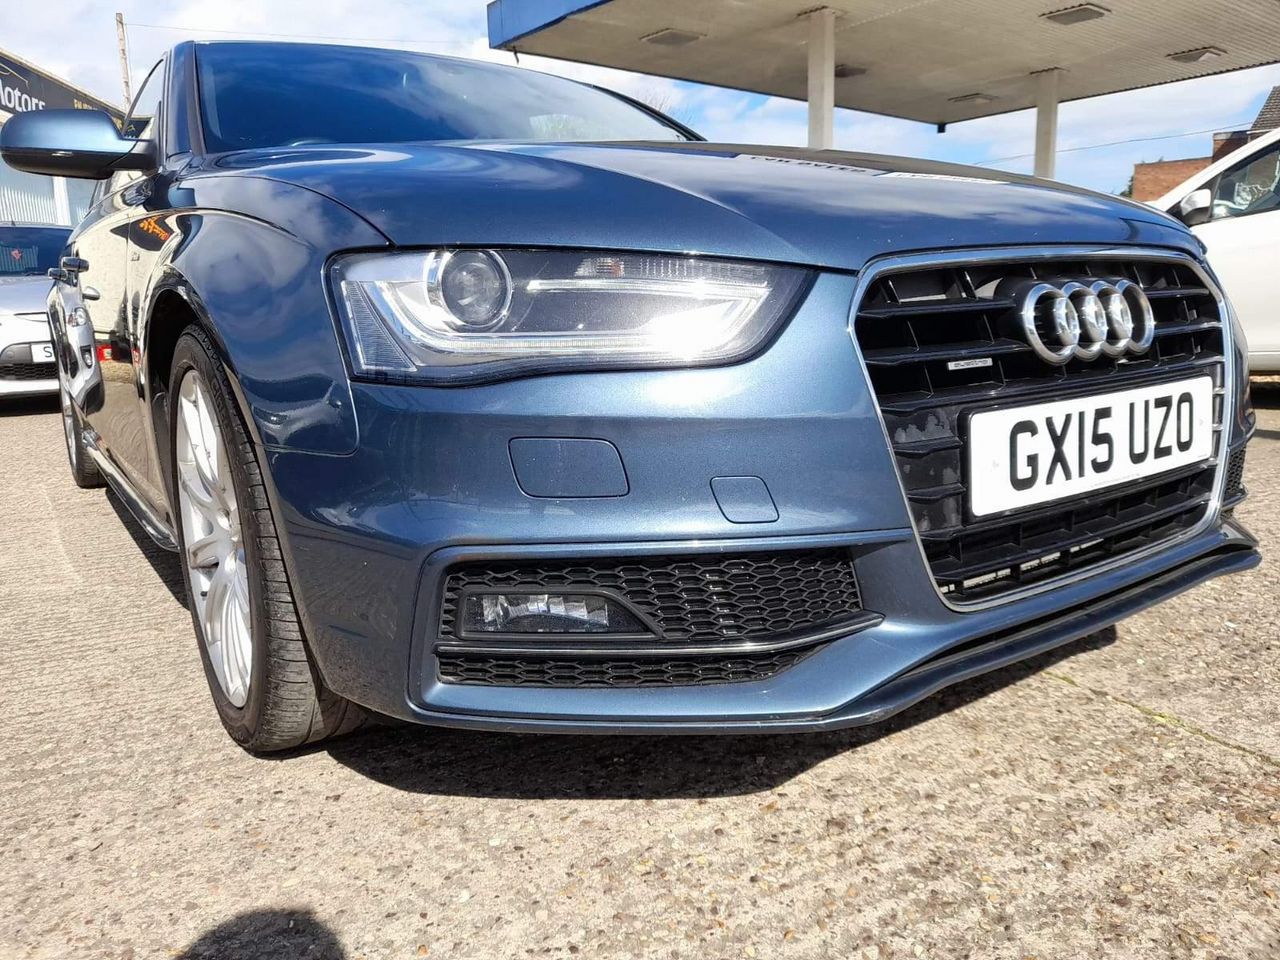 2015 Audi A4 3.0 TDI V6 S line S Tronic quattro Euro 5 (s/s) 4dr - Picture 2 of 47